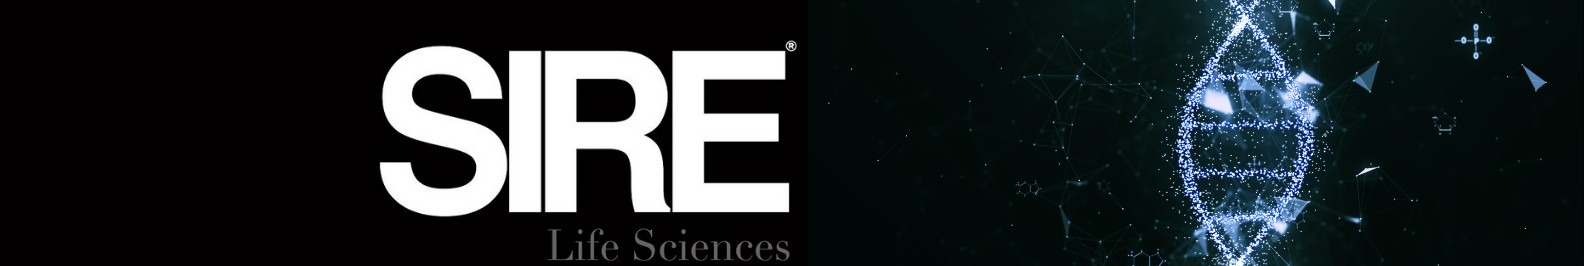 SIRE® Life Sciences background